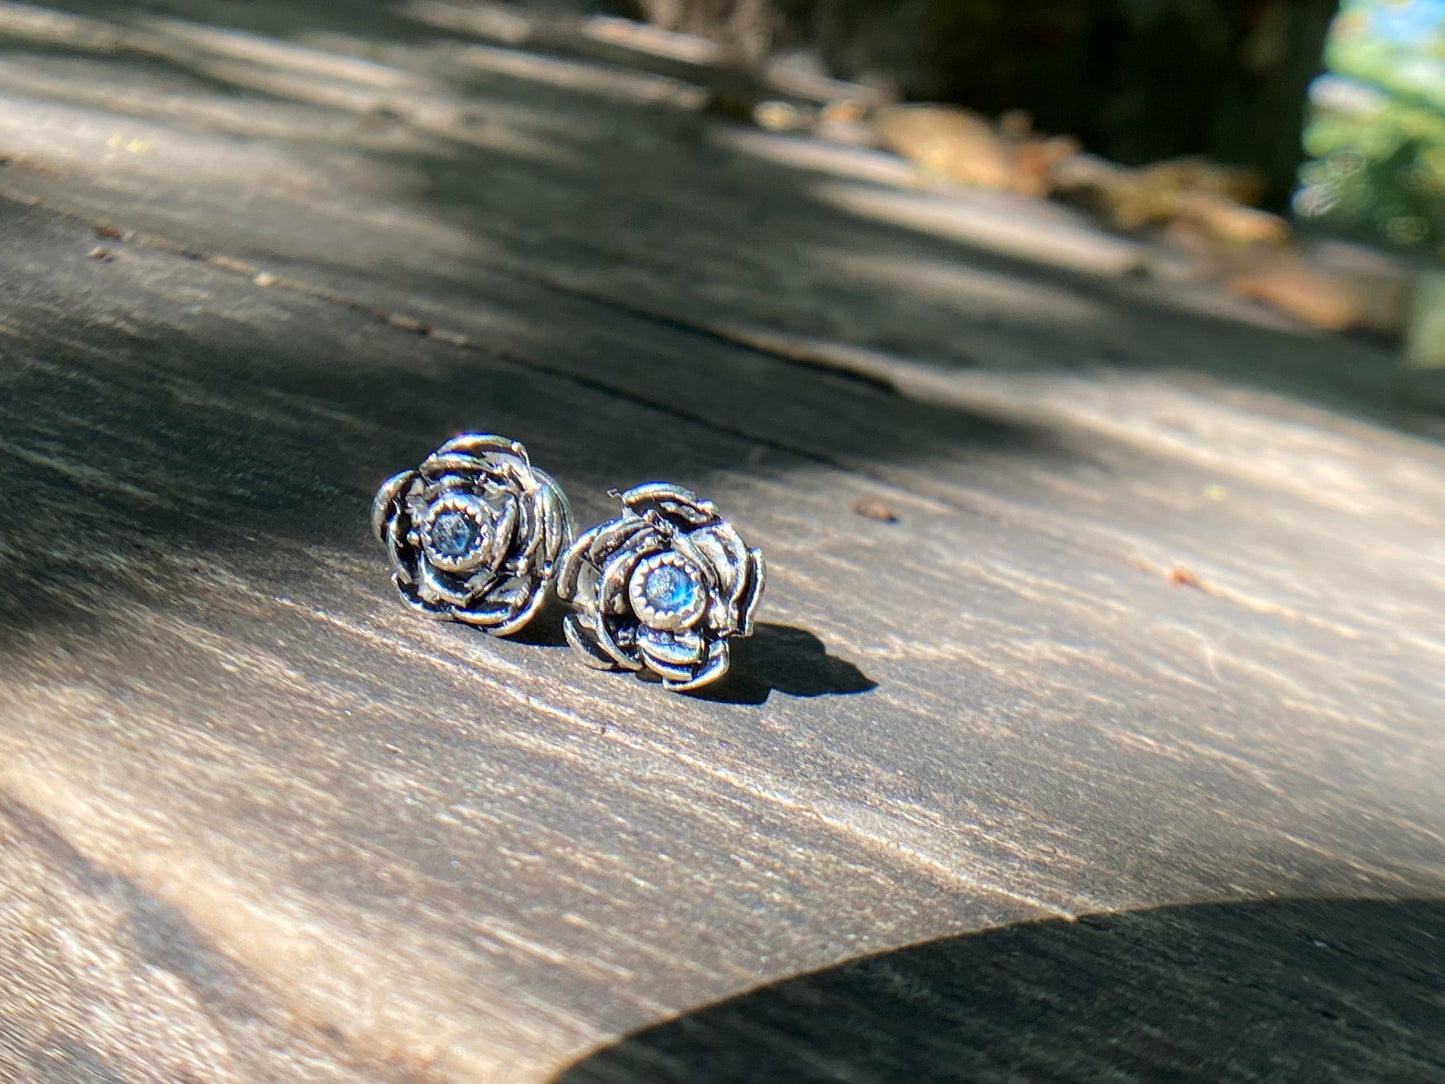 Rose wrapped silver around a small sapphire looking like the center of the bloom.